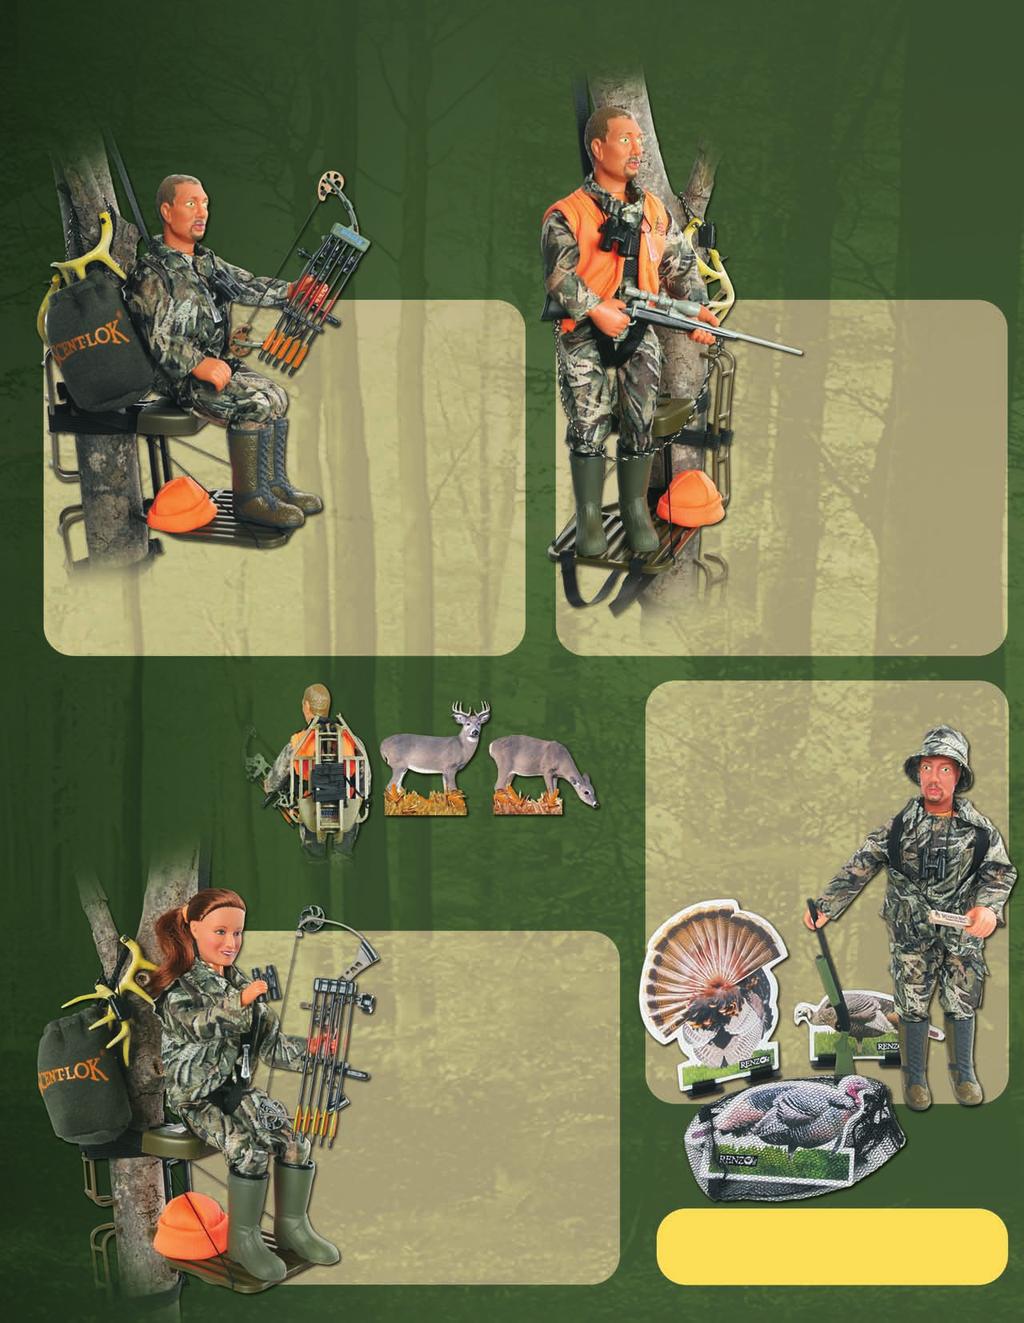 ACTION FIGURES Bow Hunter - item #003 Stocking cap Rocky hunting boots Ameristep treestand Ameristep Rapid Rail ladder sections Hunter Safety System treestand safety vest Hoyt bow and arrows Nikon